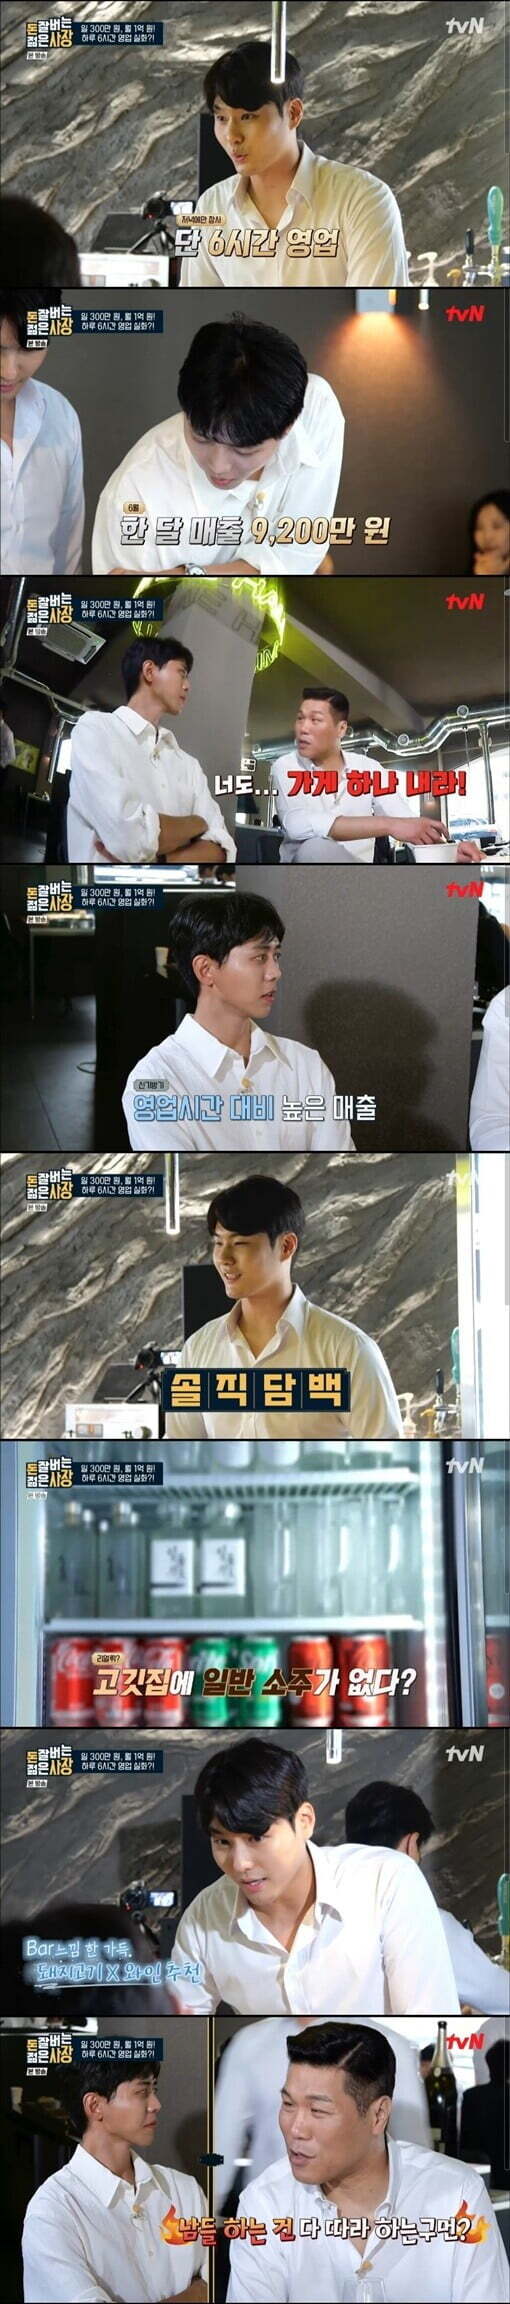 Don Jalber is a young president Seo Jang-hoon recommended Joo Woo-jae to start a business.In the 8th episode of tvN a young man who make money broadcasted on August 31, two MCs, Seo Jang-hoon and Joo Woo-jae visited Hannam-dong kunggi young president.On this day, Seo Jang-hoon was impressed by the fact that Hannam-dong kooki house is selling 3 million won a day and 100 million won a month for only 6 hours.He said, Is it because the president is handsome? Not only the boss but also the other employees are handsome?Seo Jang-hoon praised Joo Woo-jae for his appearance, saying, You should go too.Joo Woo-jae was embarrassed and said, I have some know-how.The boss said, In fact, sincerely speaking, sincereness is the most important thing, but we see sincereness and appearance. He showed the sense of serving beverages directly to the guest who praised his appearance.Also, one of the secrets of this house is that it does not sell beer and soju.It was know-how that the wine that would fit well with Jeju pig Meat was paired so that the guests felt like a restaurant to enjoy in an atmosphere-friendly restaurant.